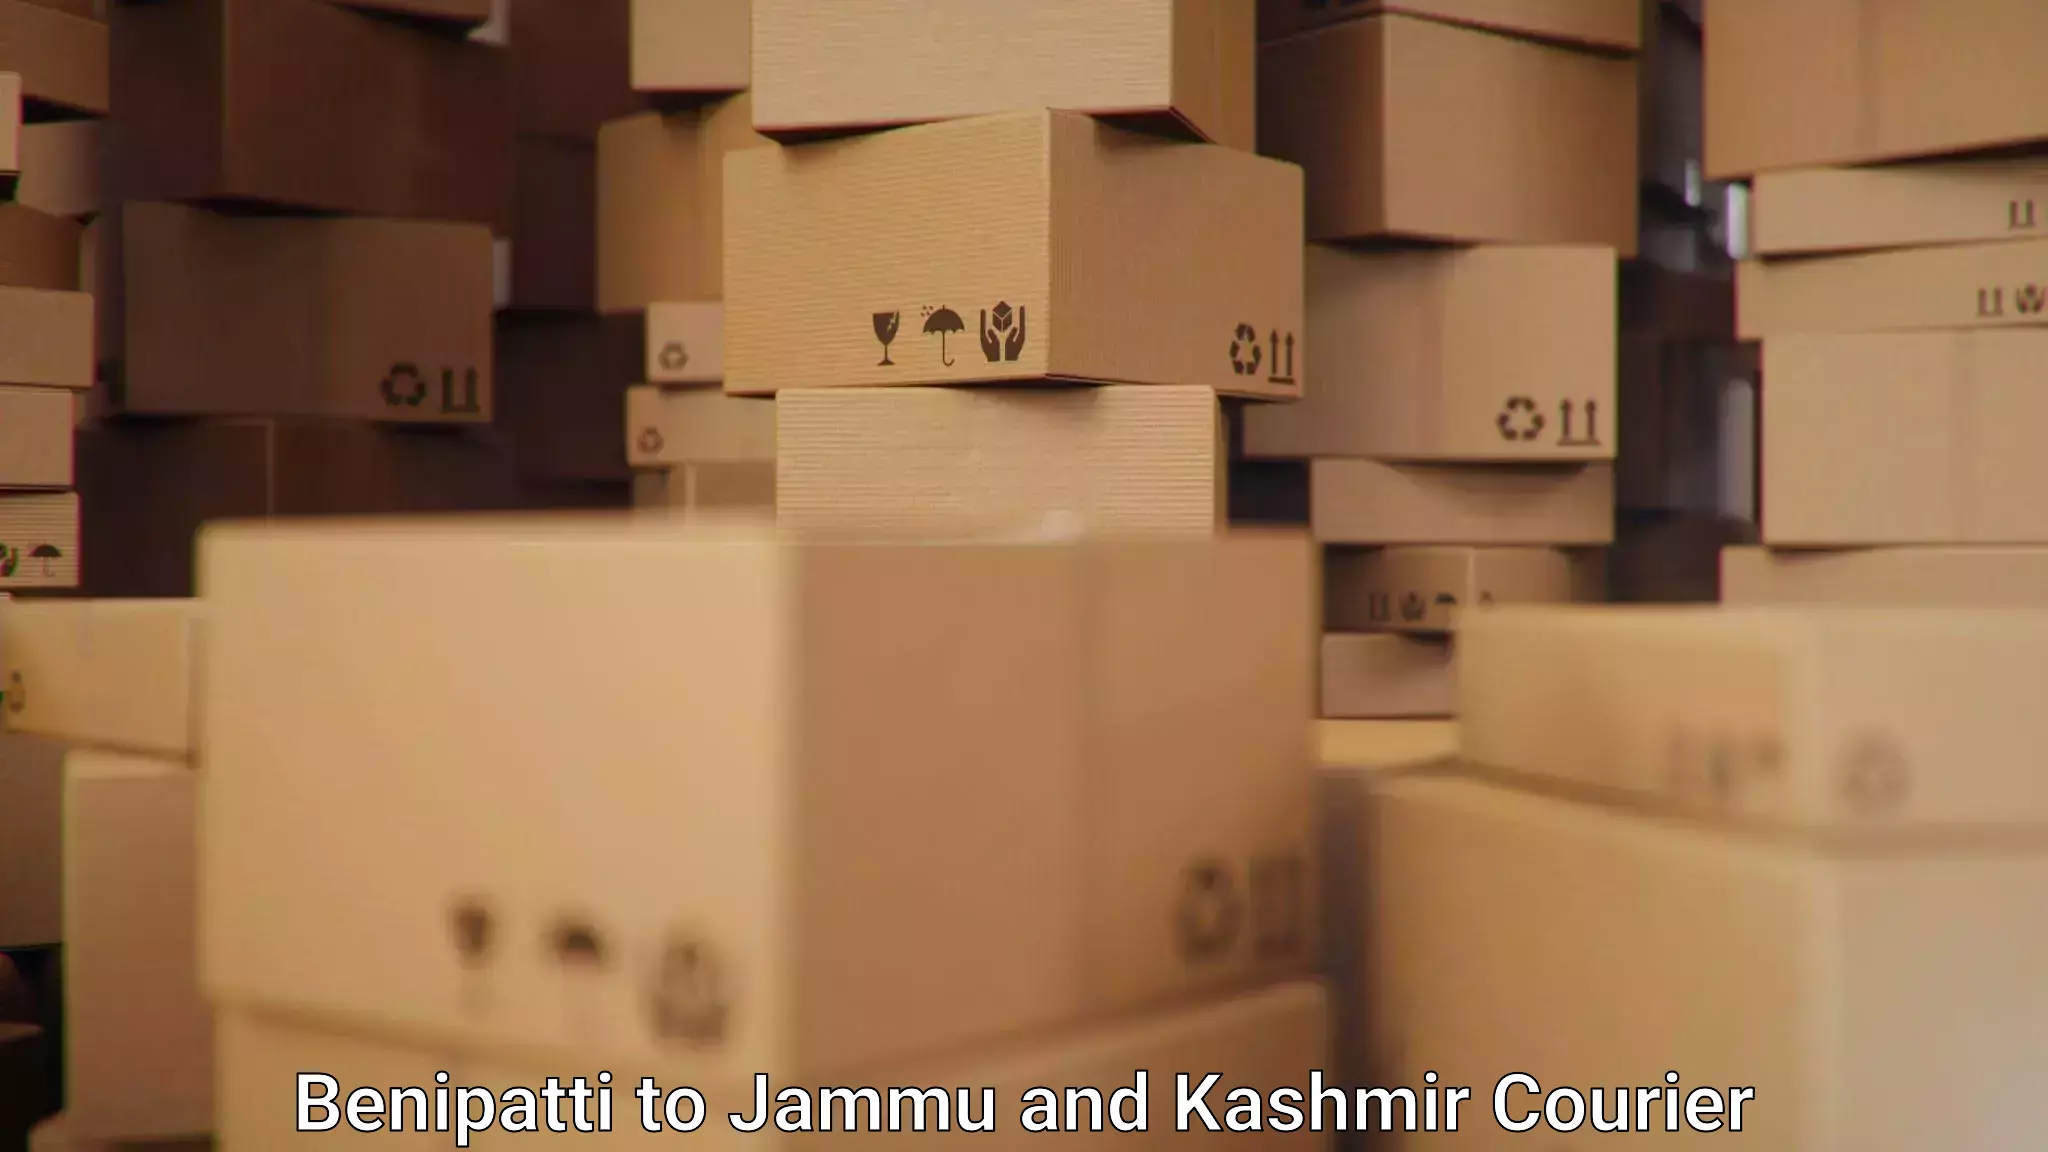 Efficient courier operations Benipatti to Shopian